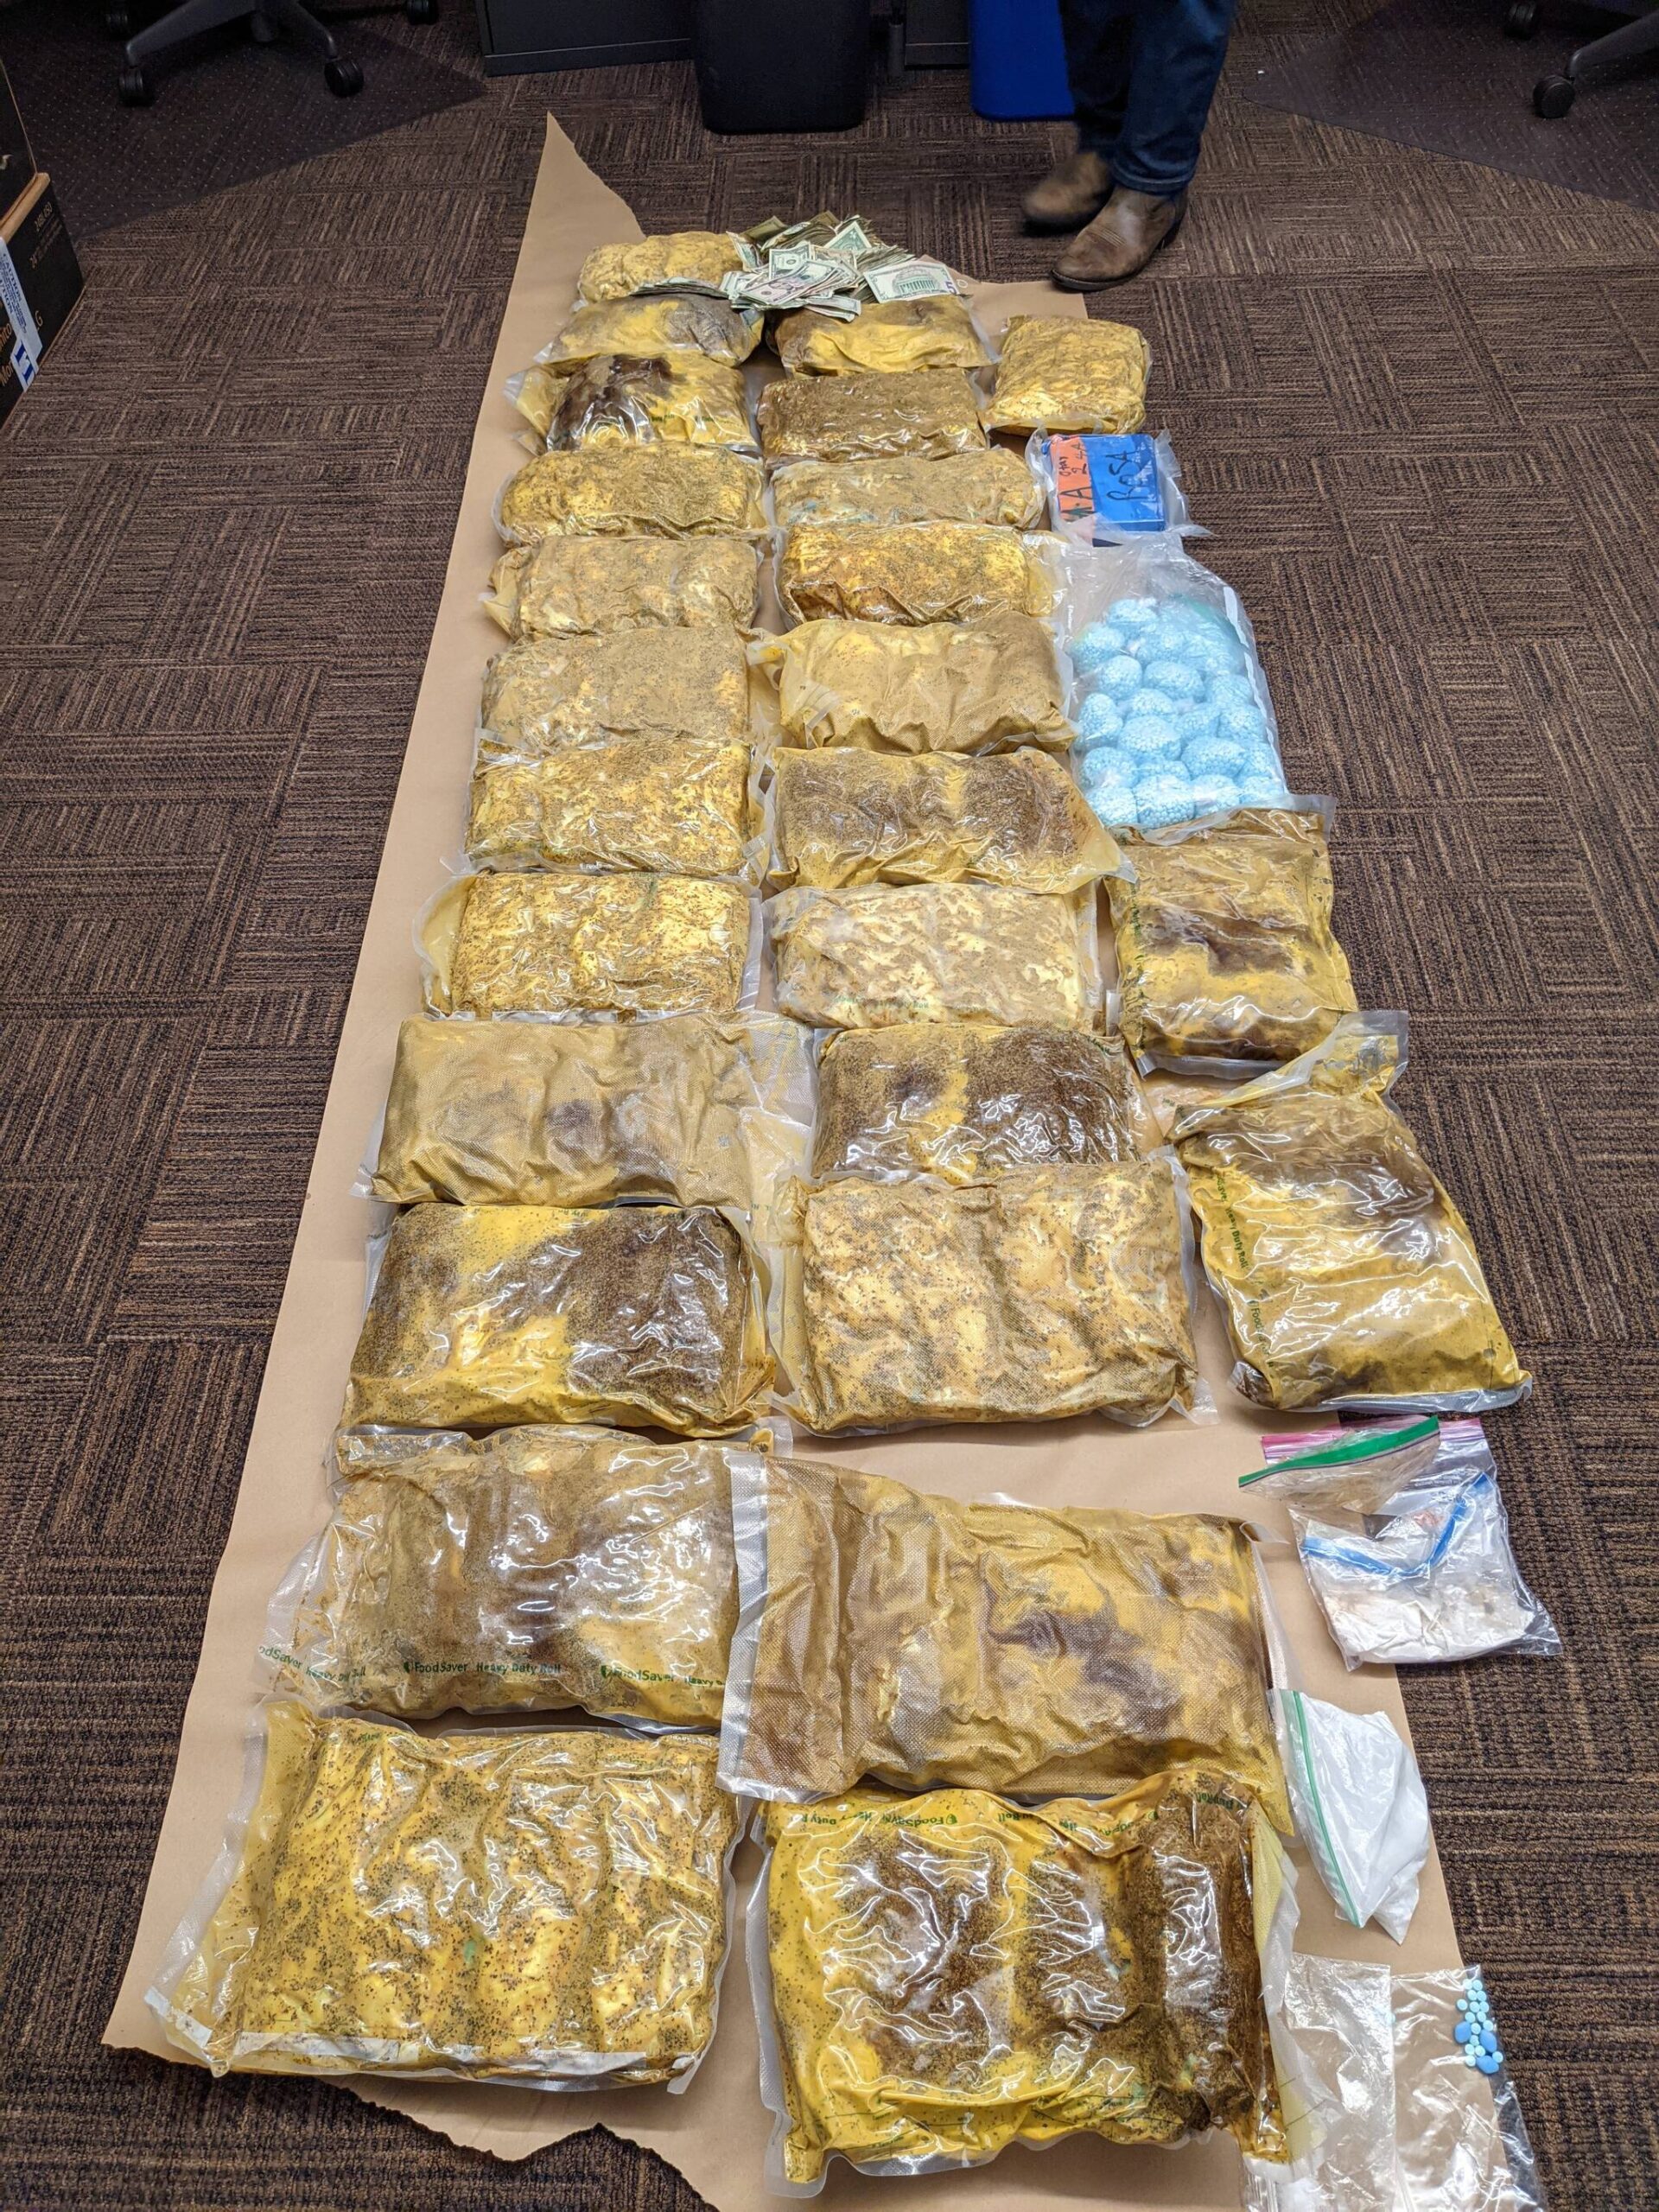 Approximately 104 pounds of methamphetamine, more than 2 pounds of suspected fentanyl powder, and more than 20,000 suspected fentanyl pills seized by law enforcement. (Courtesy of the Department of Justice)